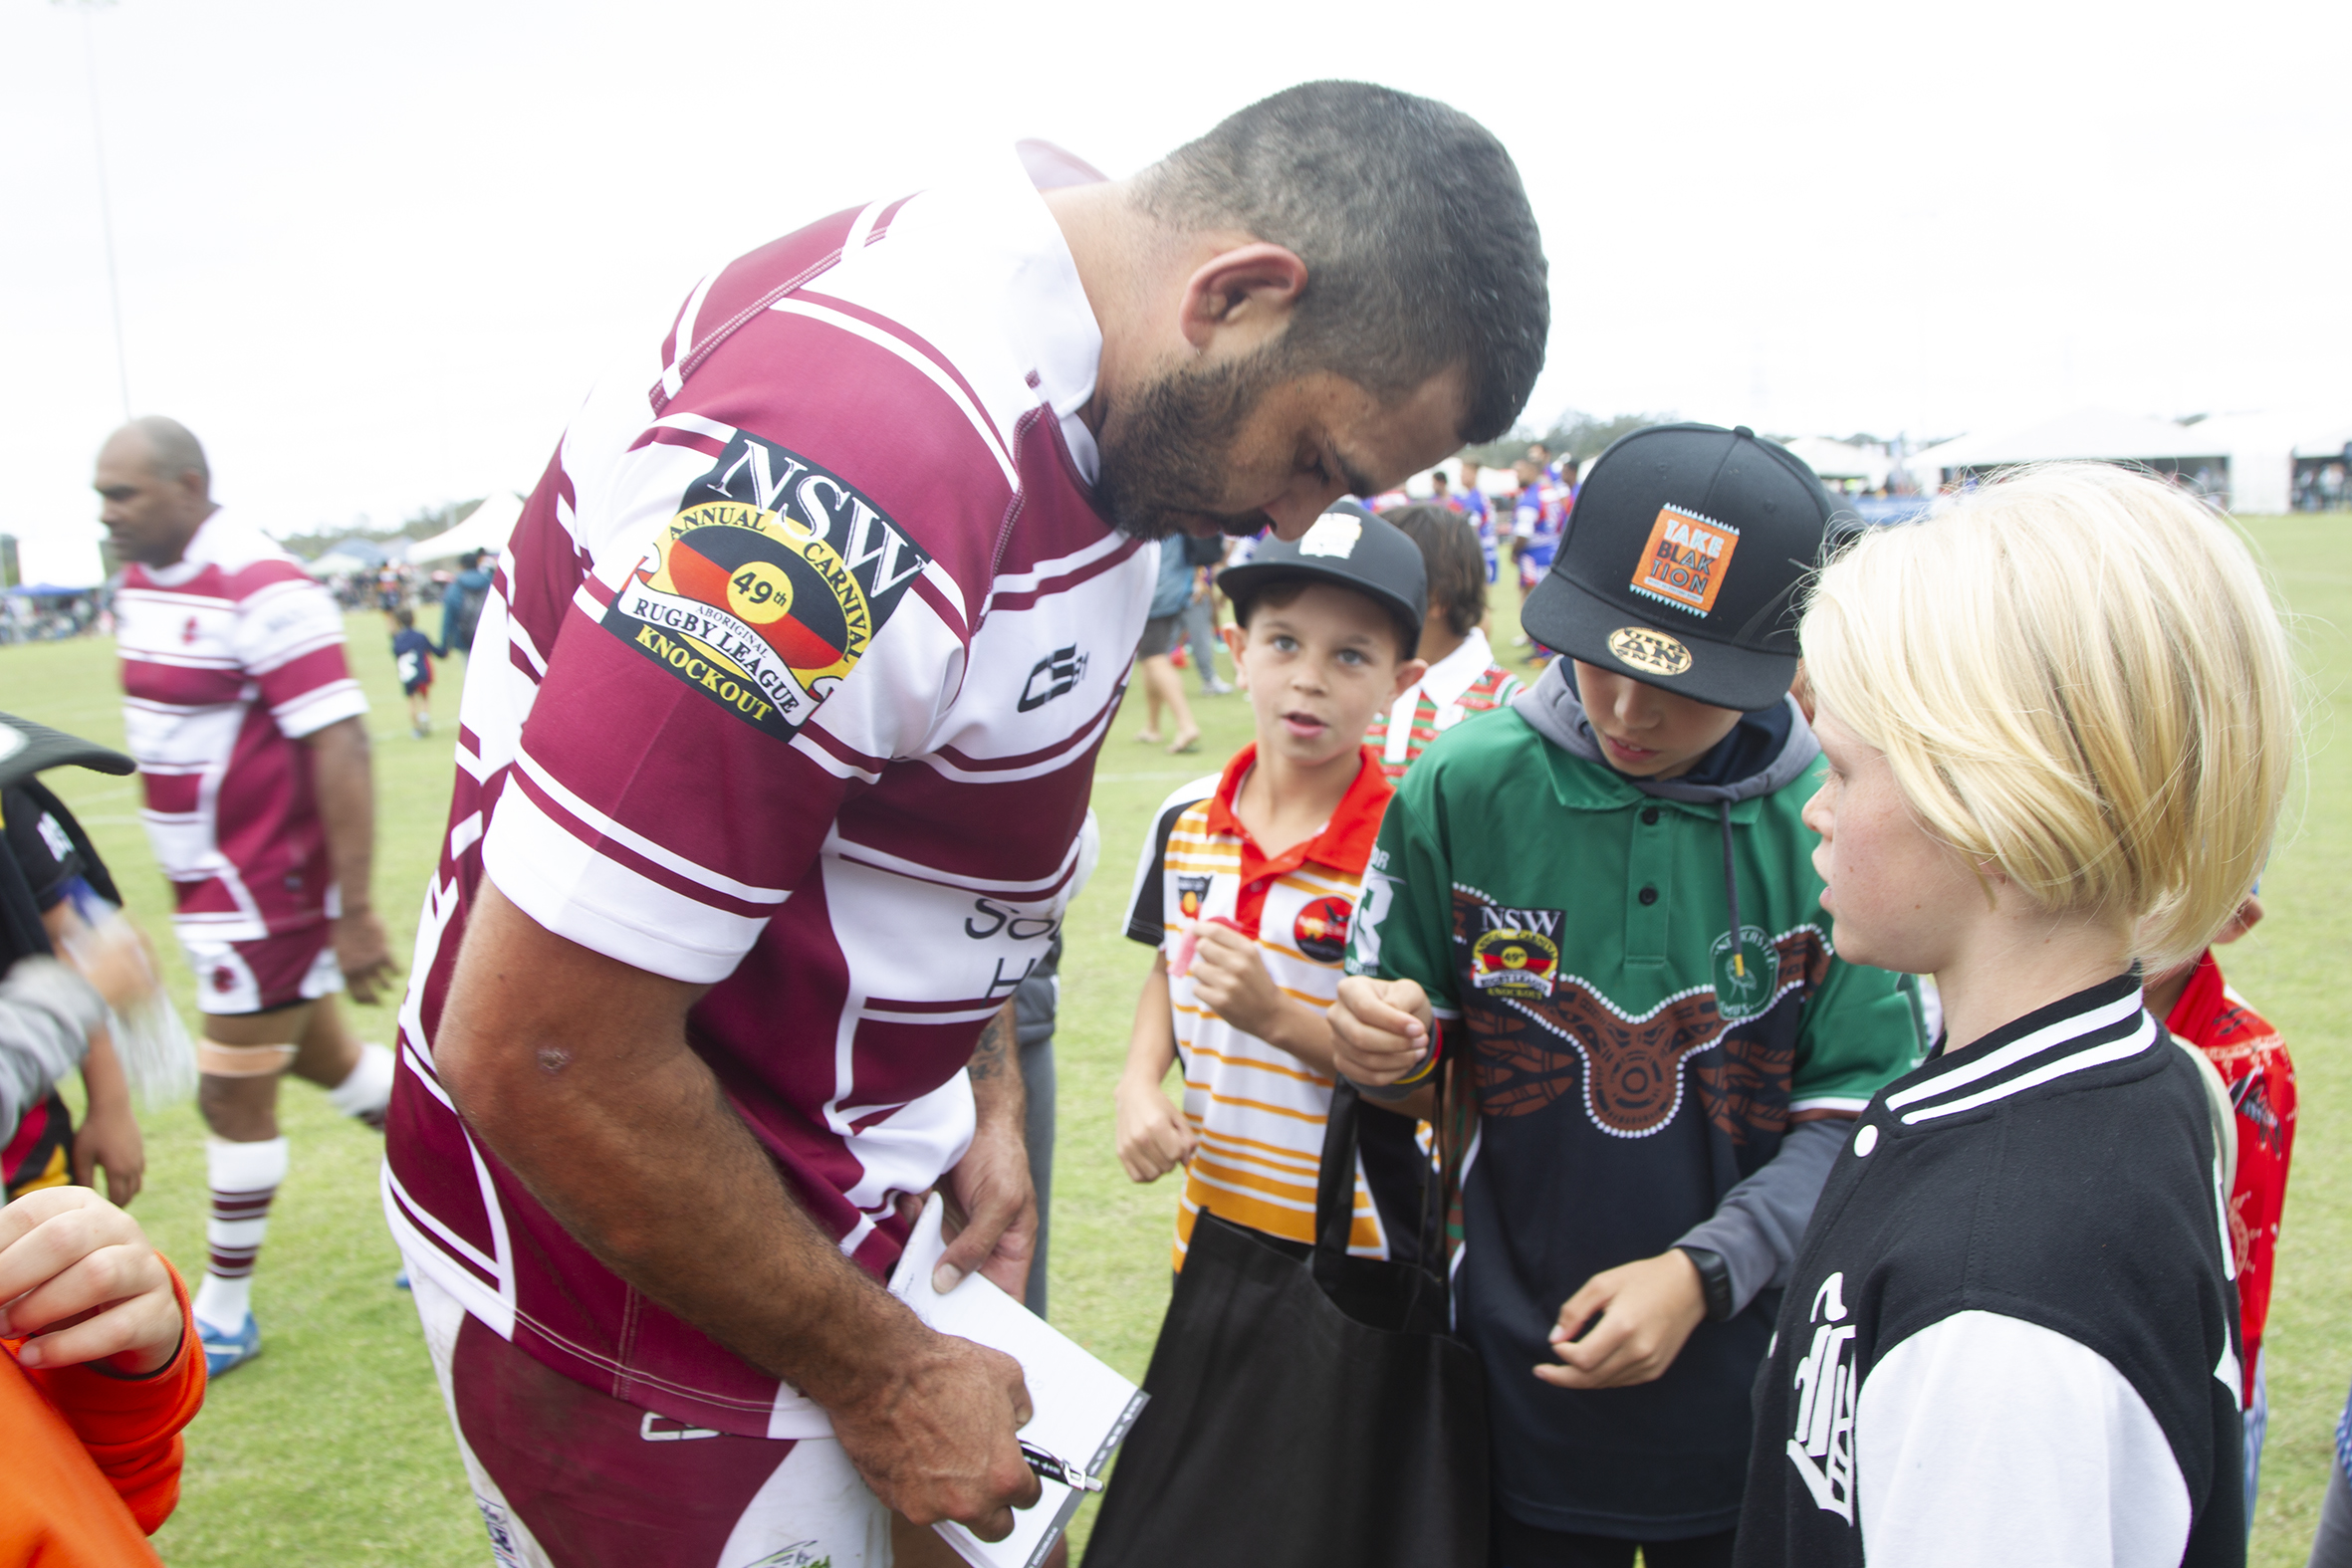 Player Greg Inglis signs autographs for fans on sports field at Tuggerah